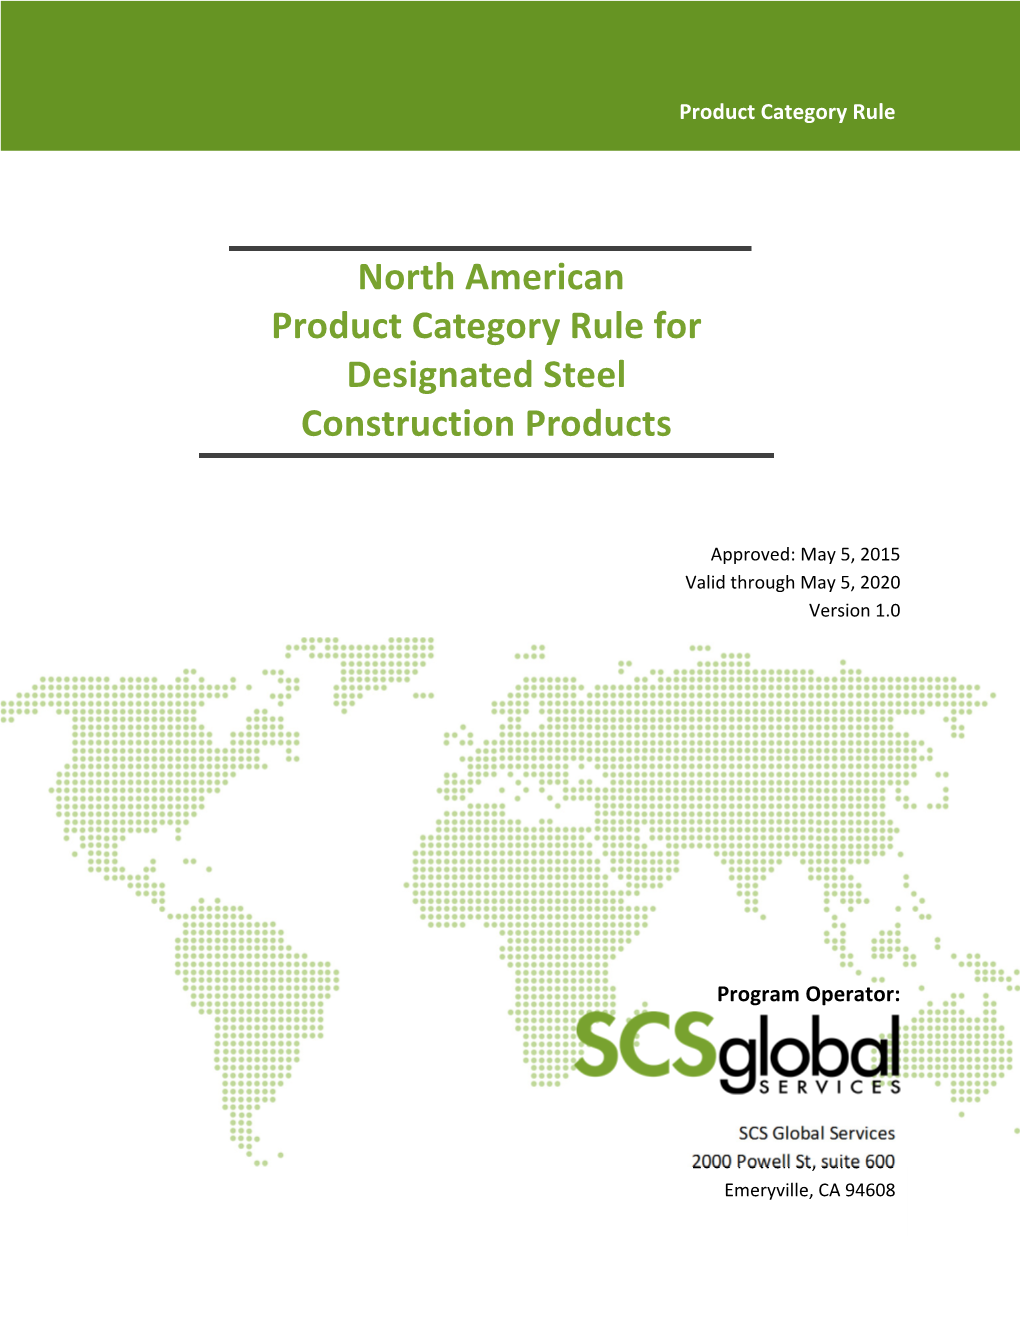 North American Product Category Rule for Designated Steel Construction Products